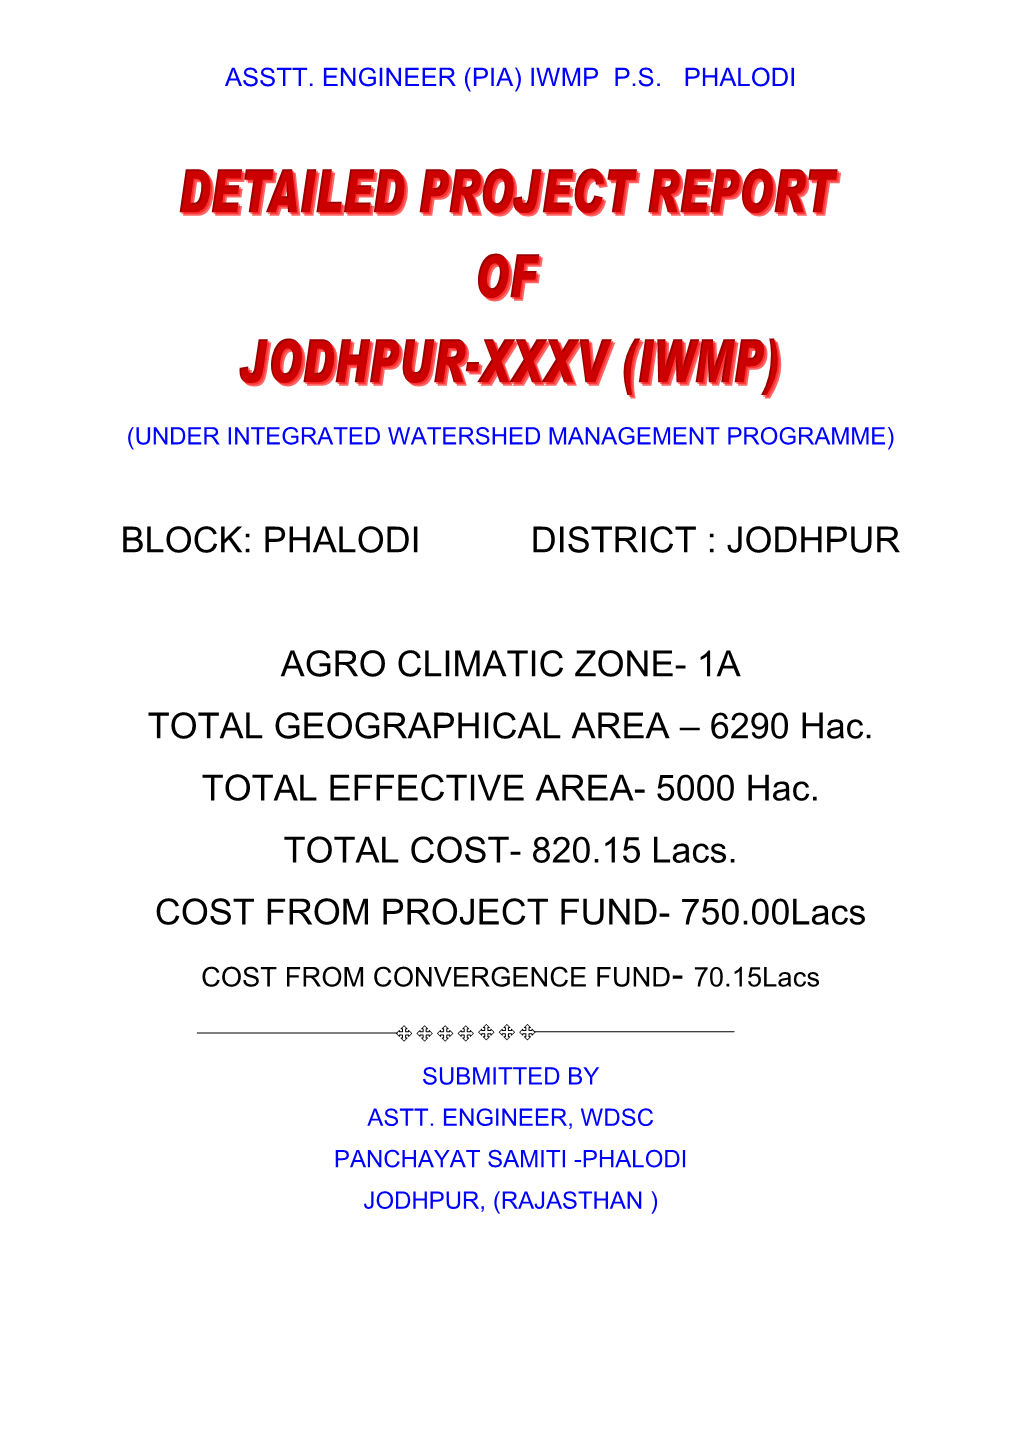 BLOCK: PHALODI DISTRICT : JODHPUR AGRO CLIMATIC ZONE- 1A TOTAL GEOGRAPHICAL AREA – 6290 Hac. TOTAL EFFECTIVE AREA- 5000 Ha